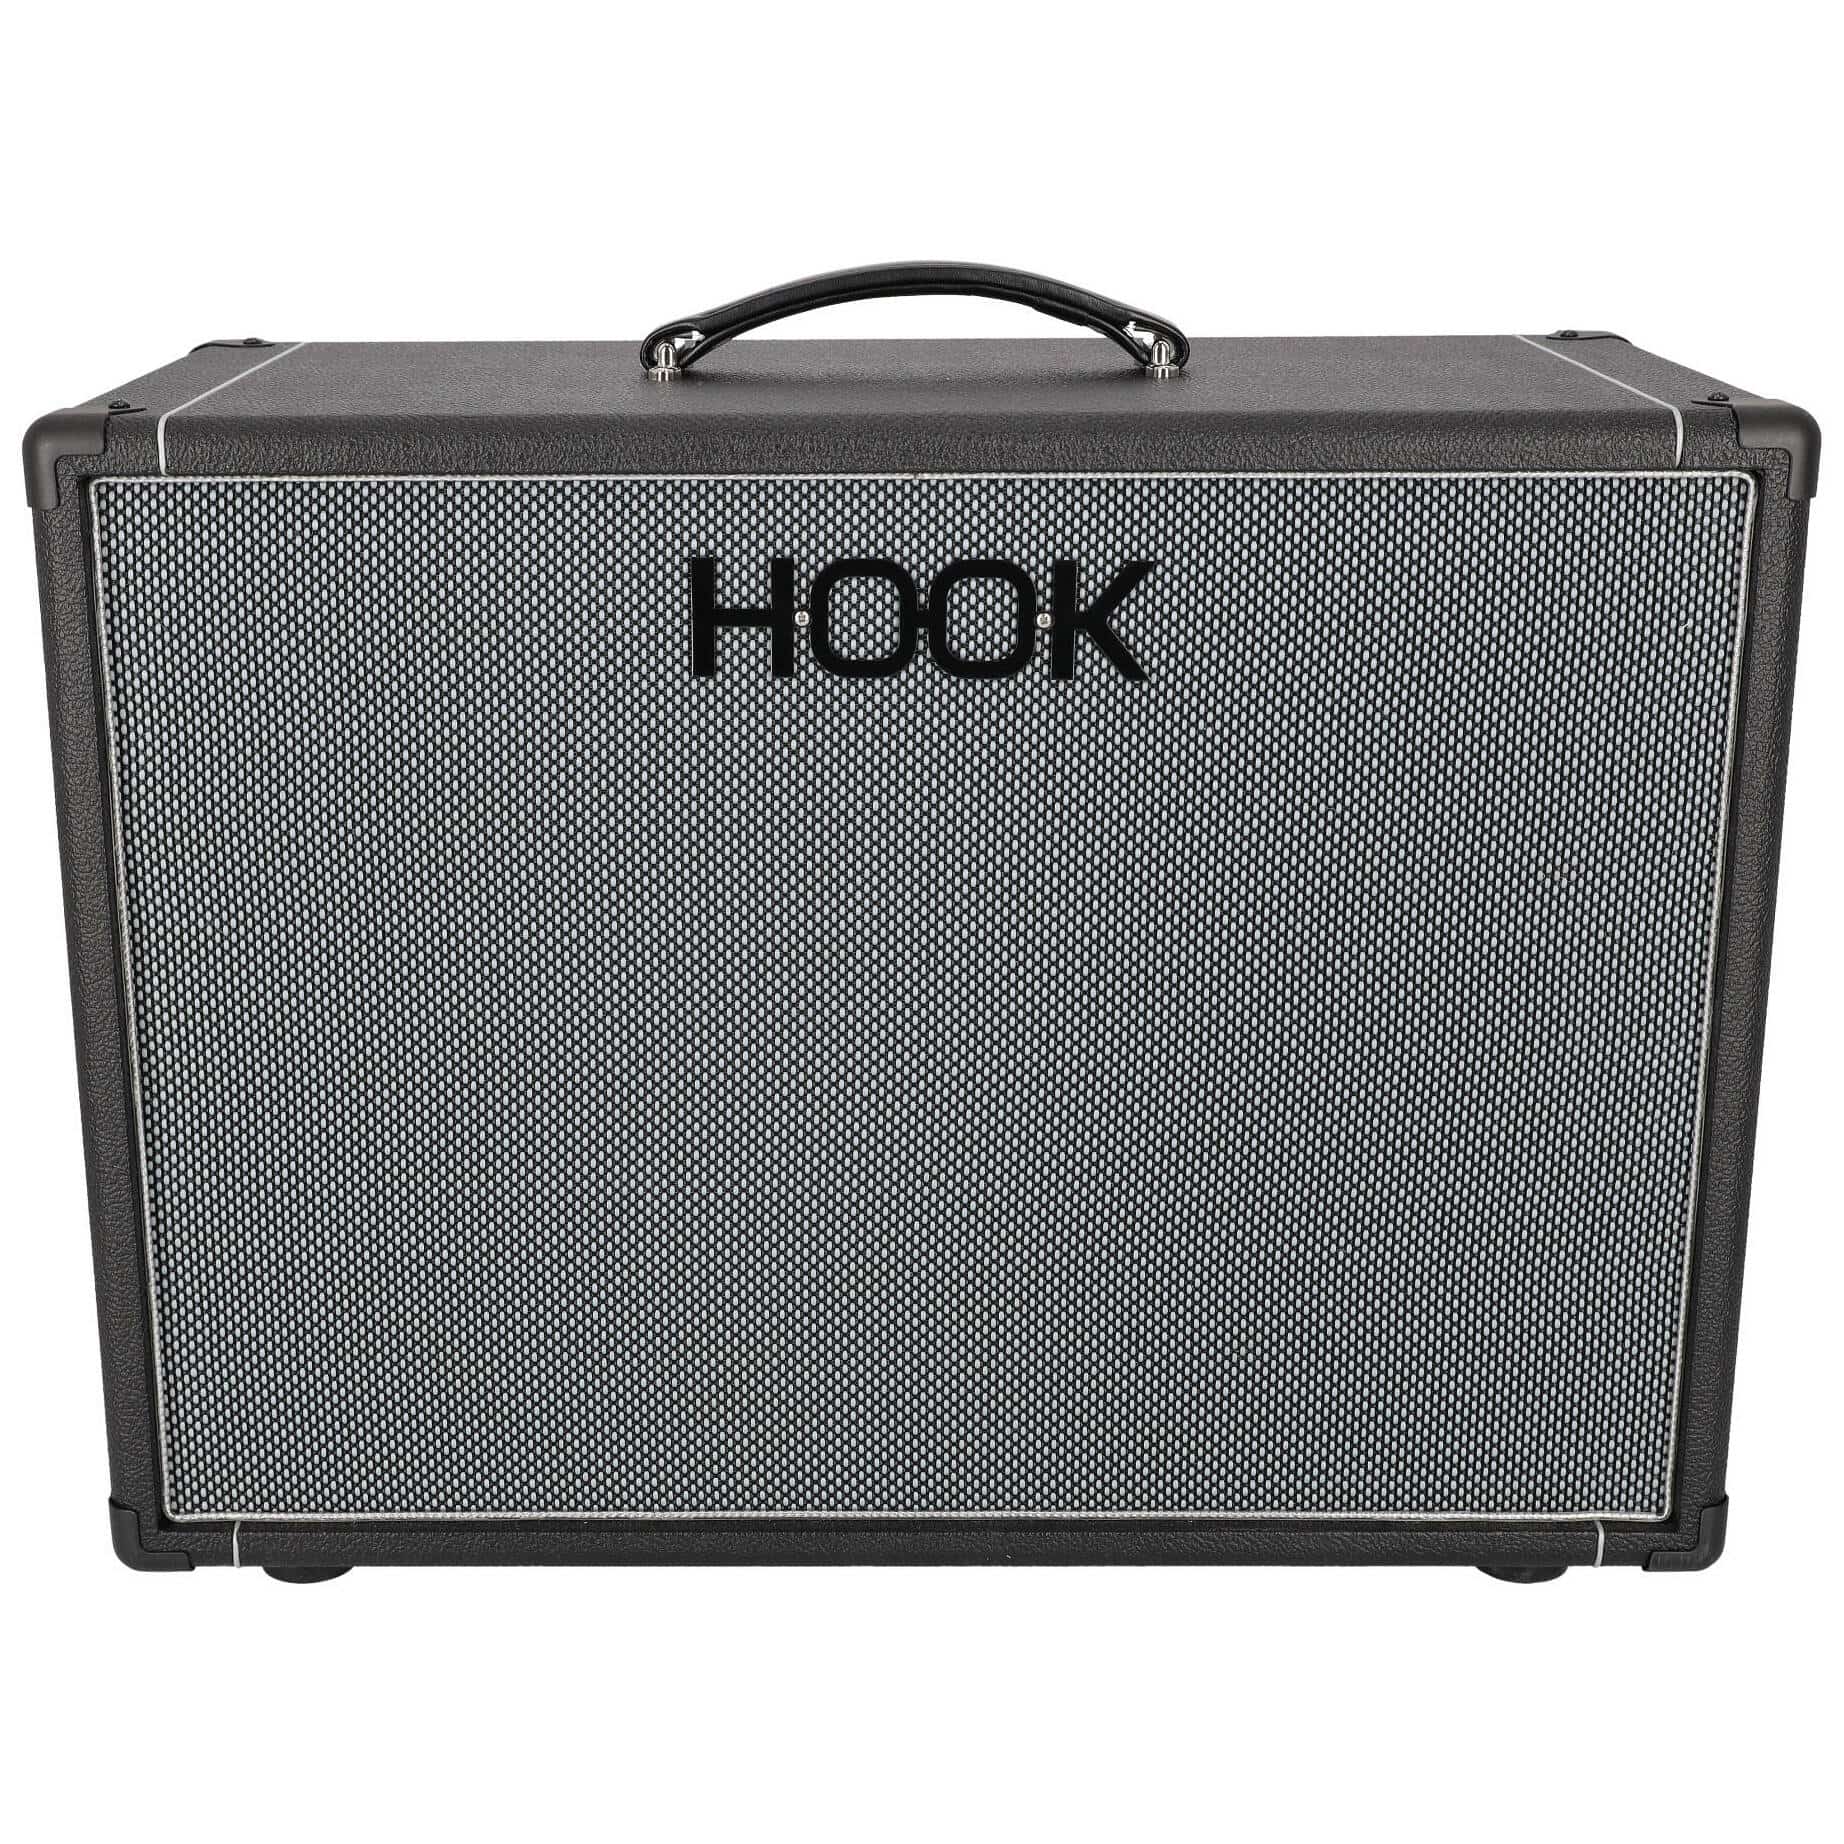 Hook Amplification 1x12 Cabinet WGS Oval Black 2